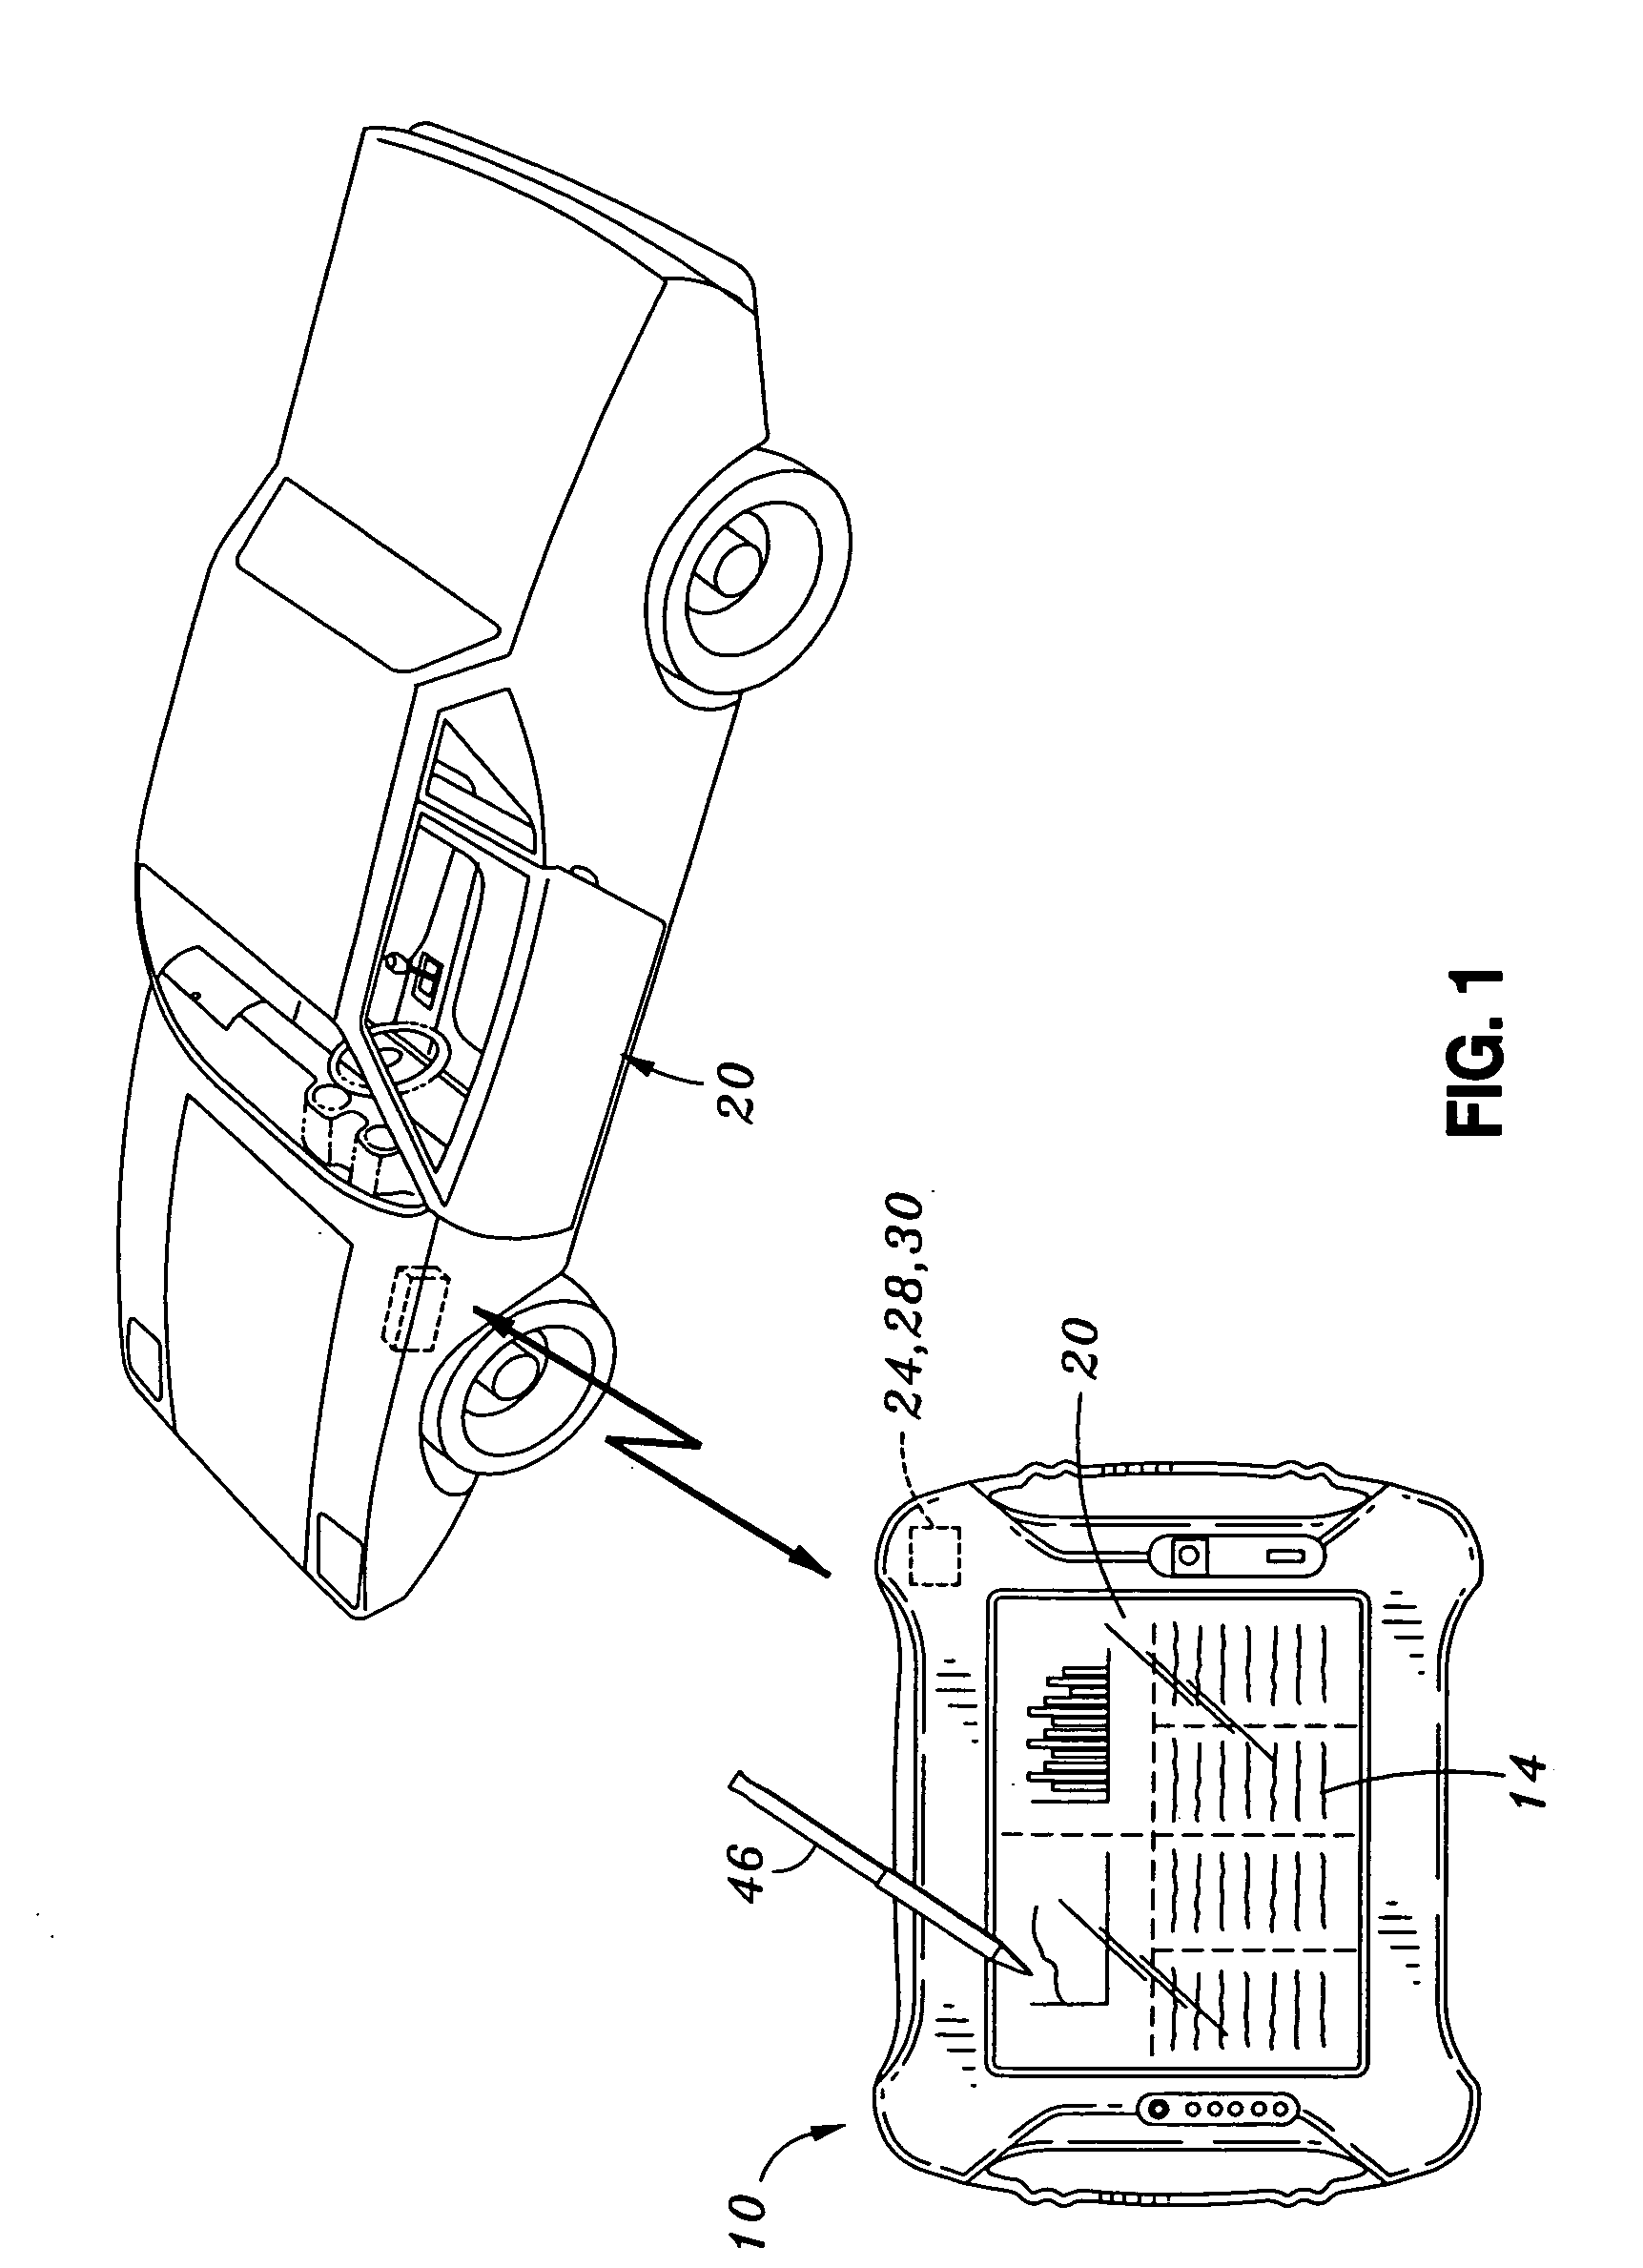 OBD II-compliant diagnostic PC tablet and method of use